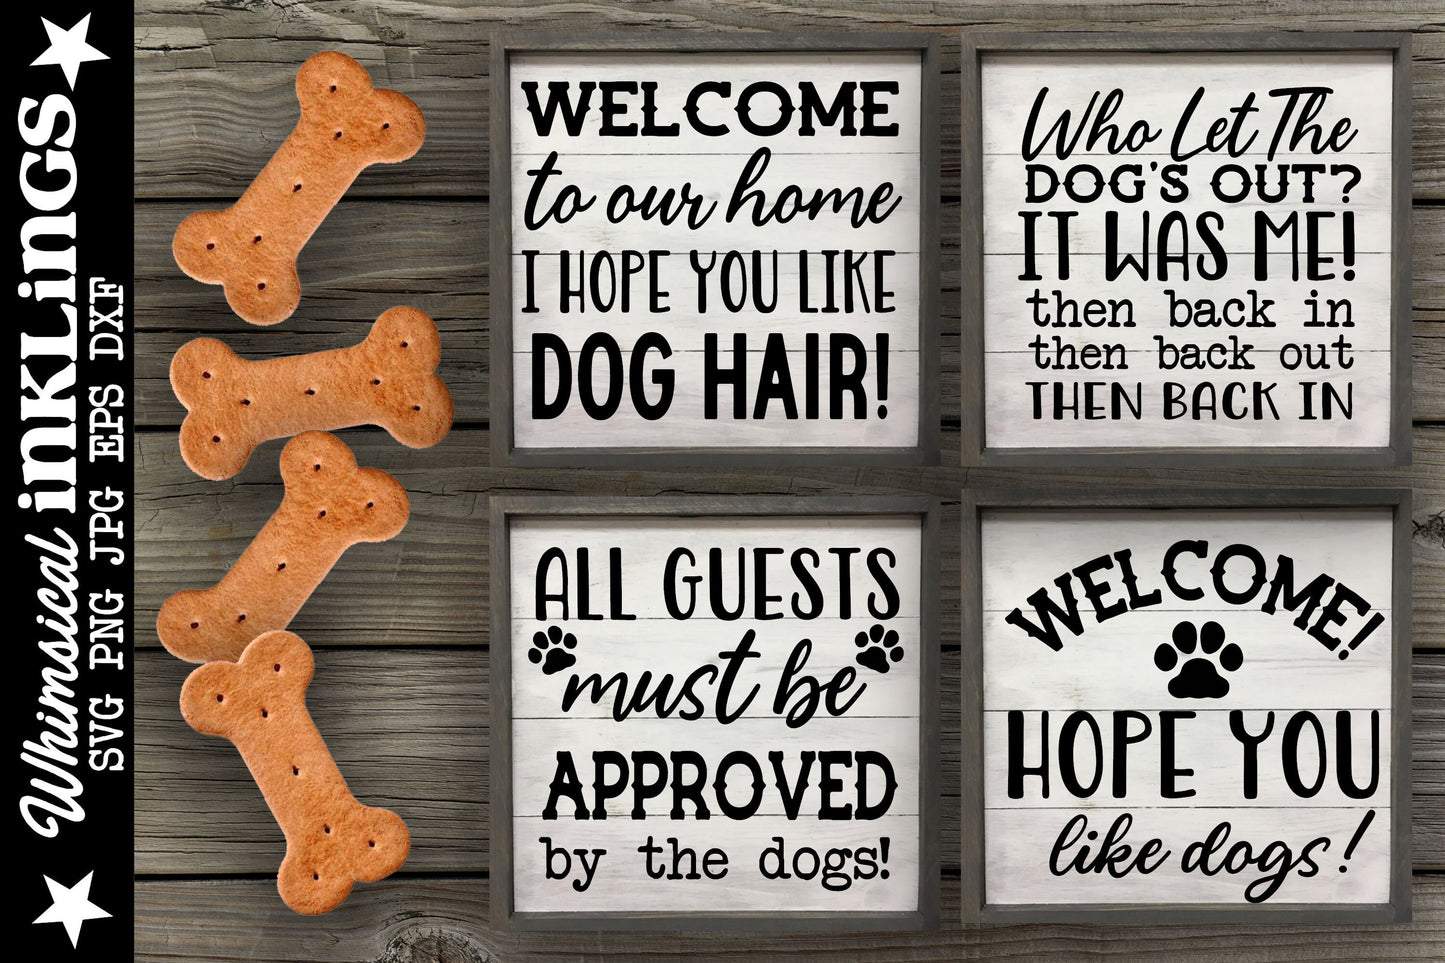 Hope You Like Dogs-Sign SVG Set  Cutter File for use with Cricut, Silhouette, and other Vinyl Cutting Machines, Commercial Use Allowed